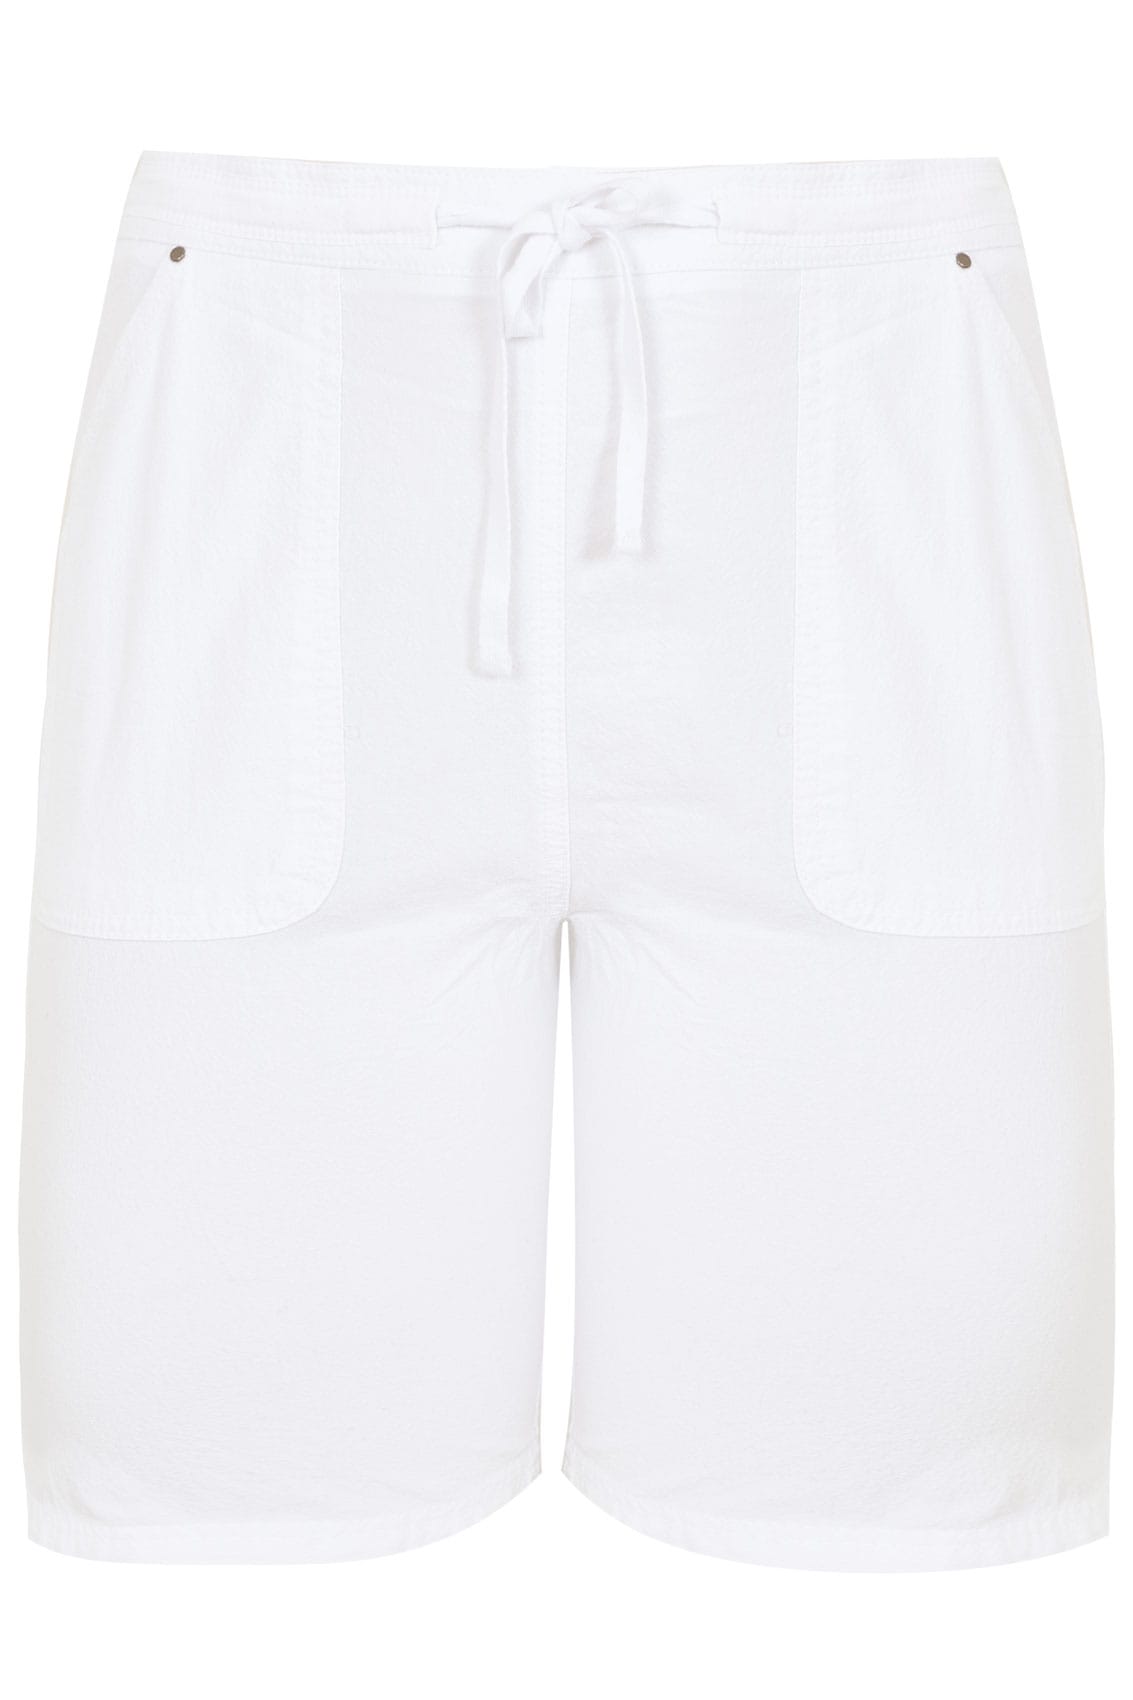 White Cool Cotton Pull On Shorts, Plus size 16 to 36